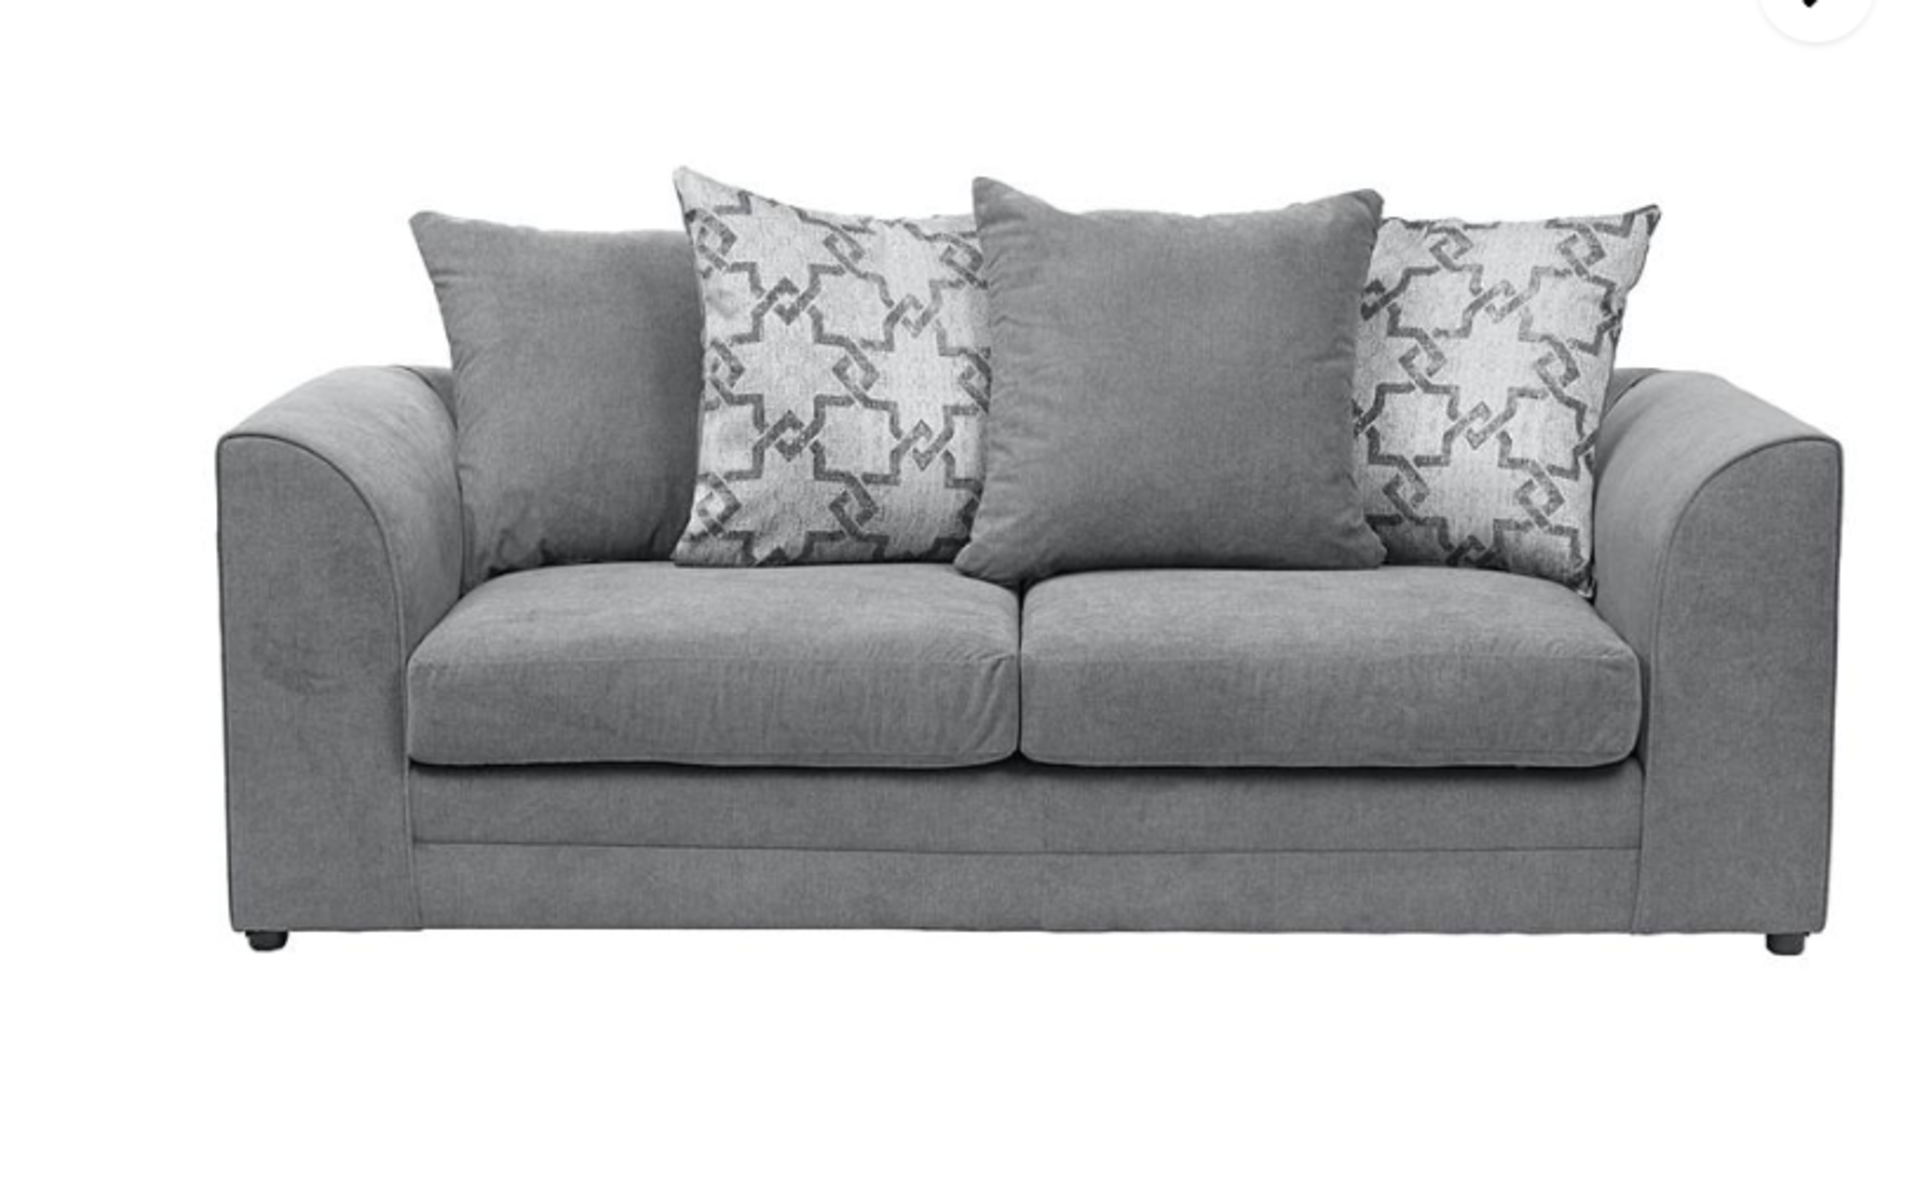 Grace 3 Seater Sofa. - SR. RRP £949.00. This Grace 3 Seater Sofa is perfect for those after a